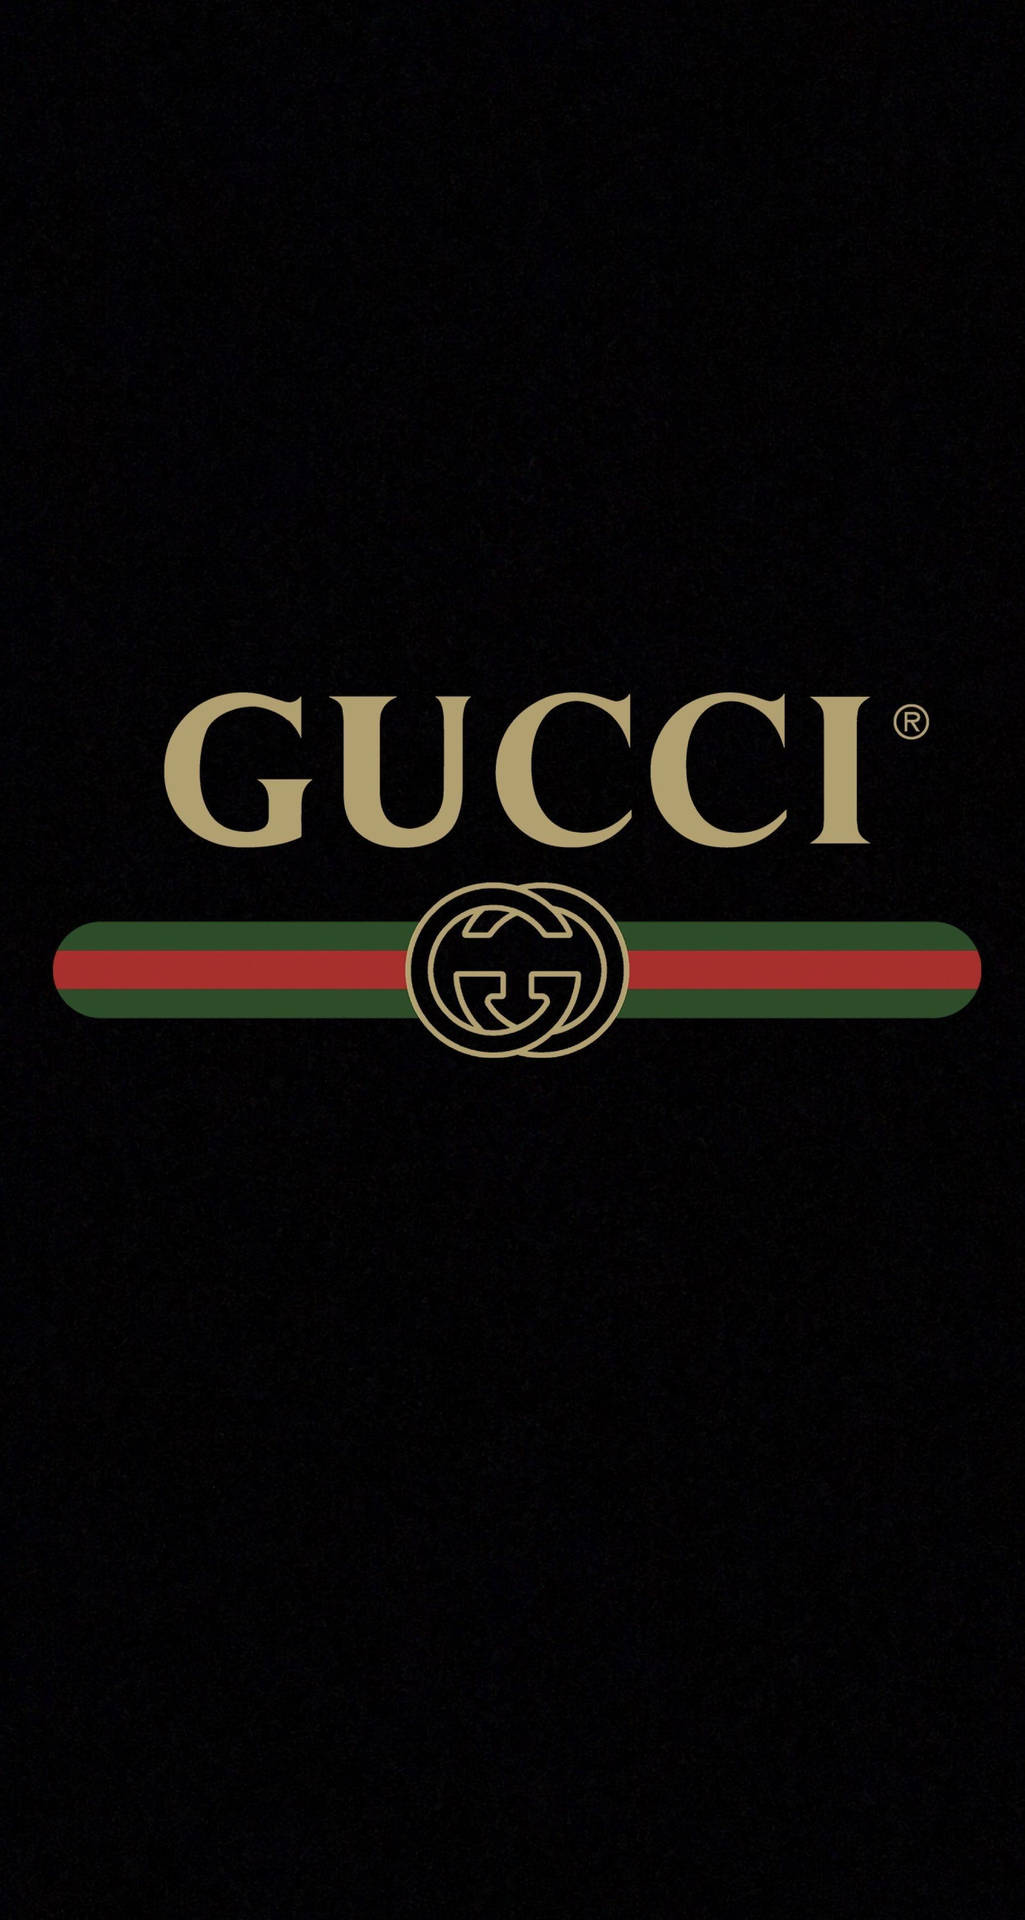 Gucci 2019X3783 Wallpaper and Background Image